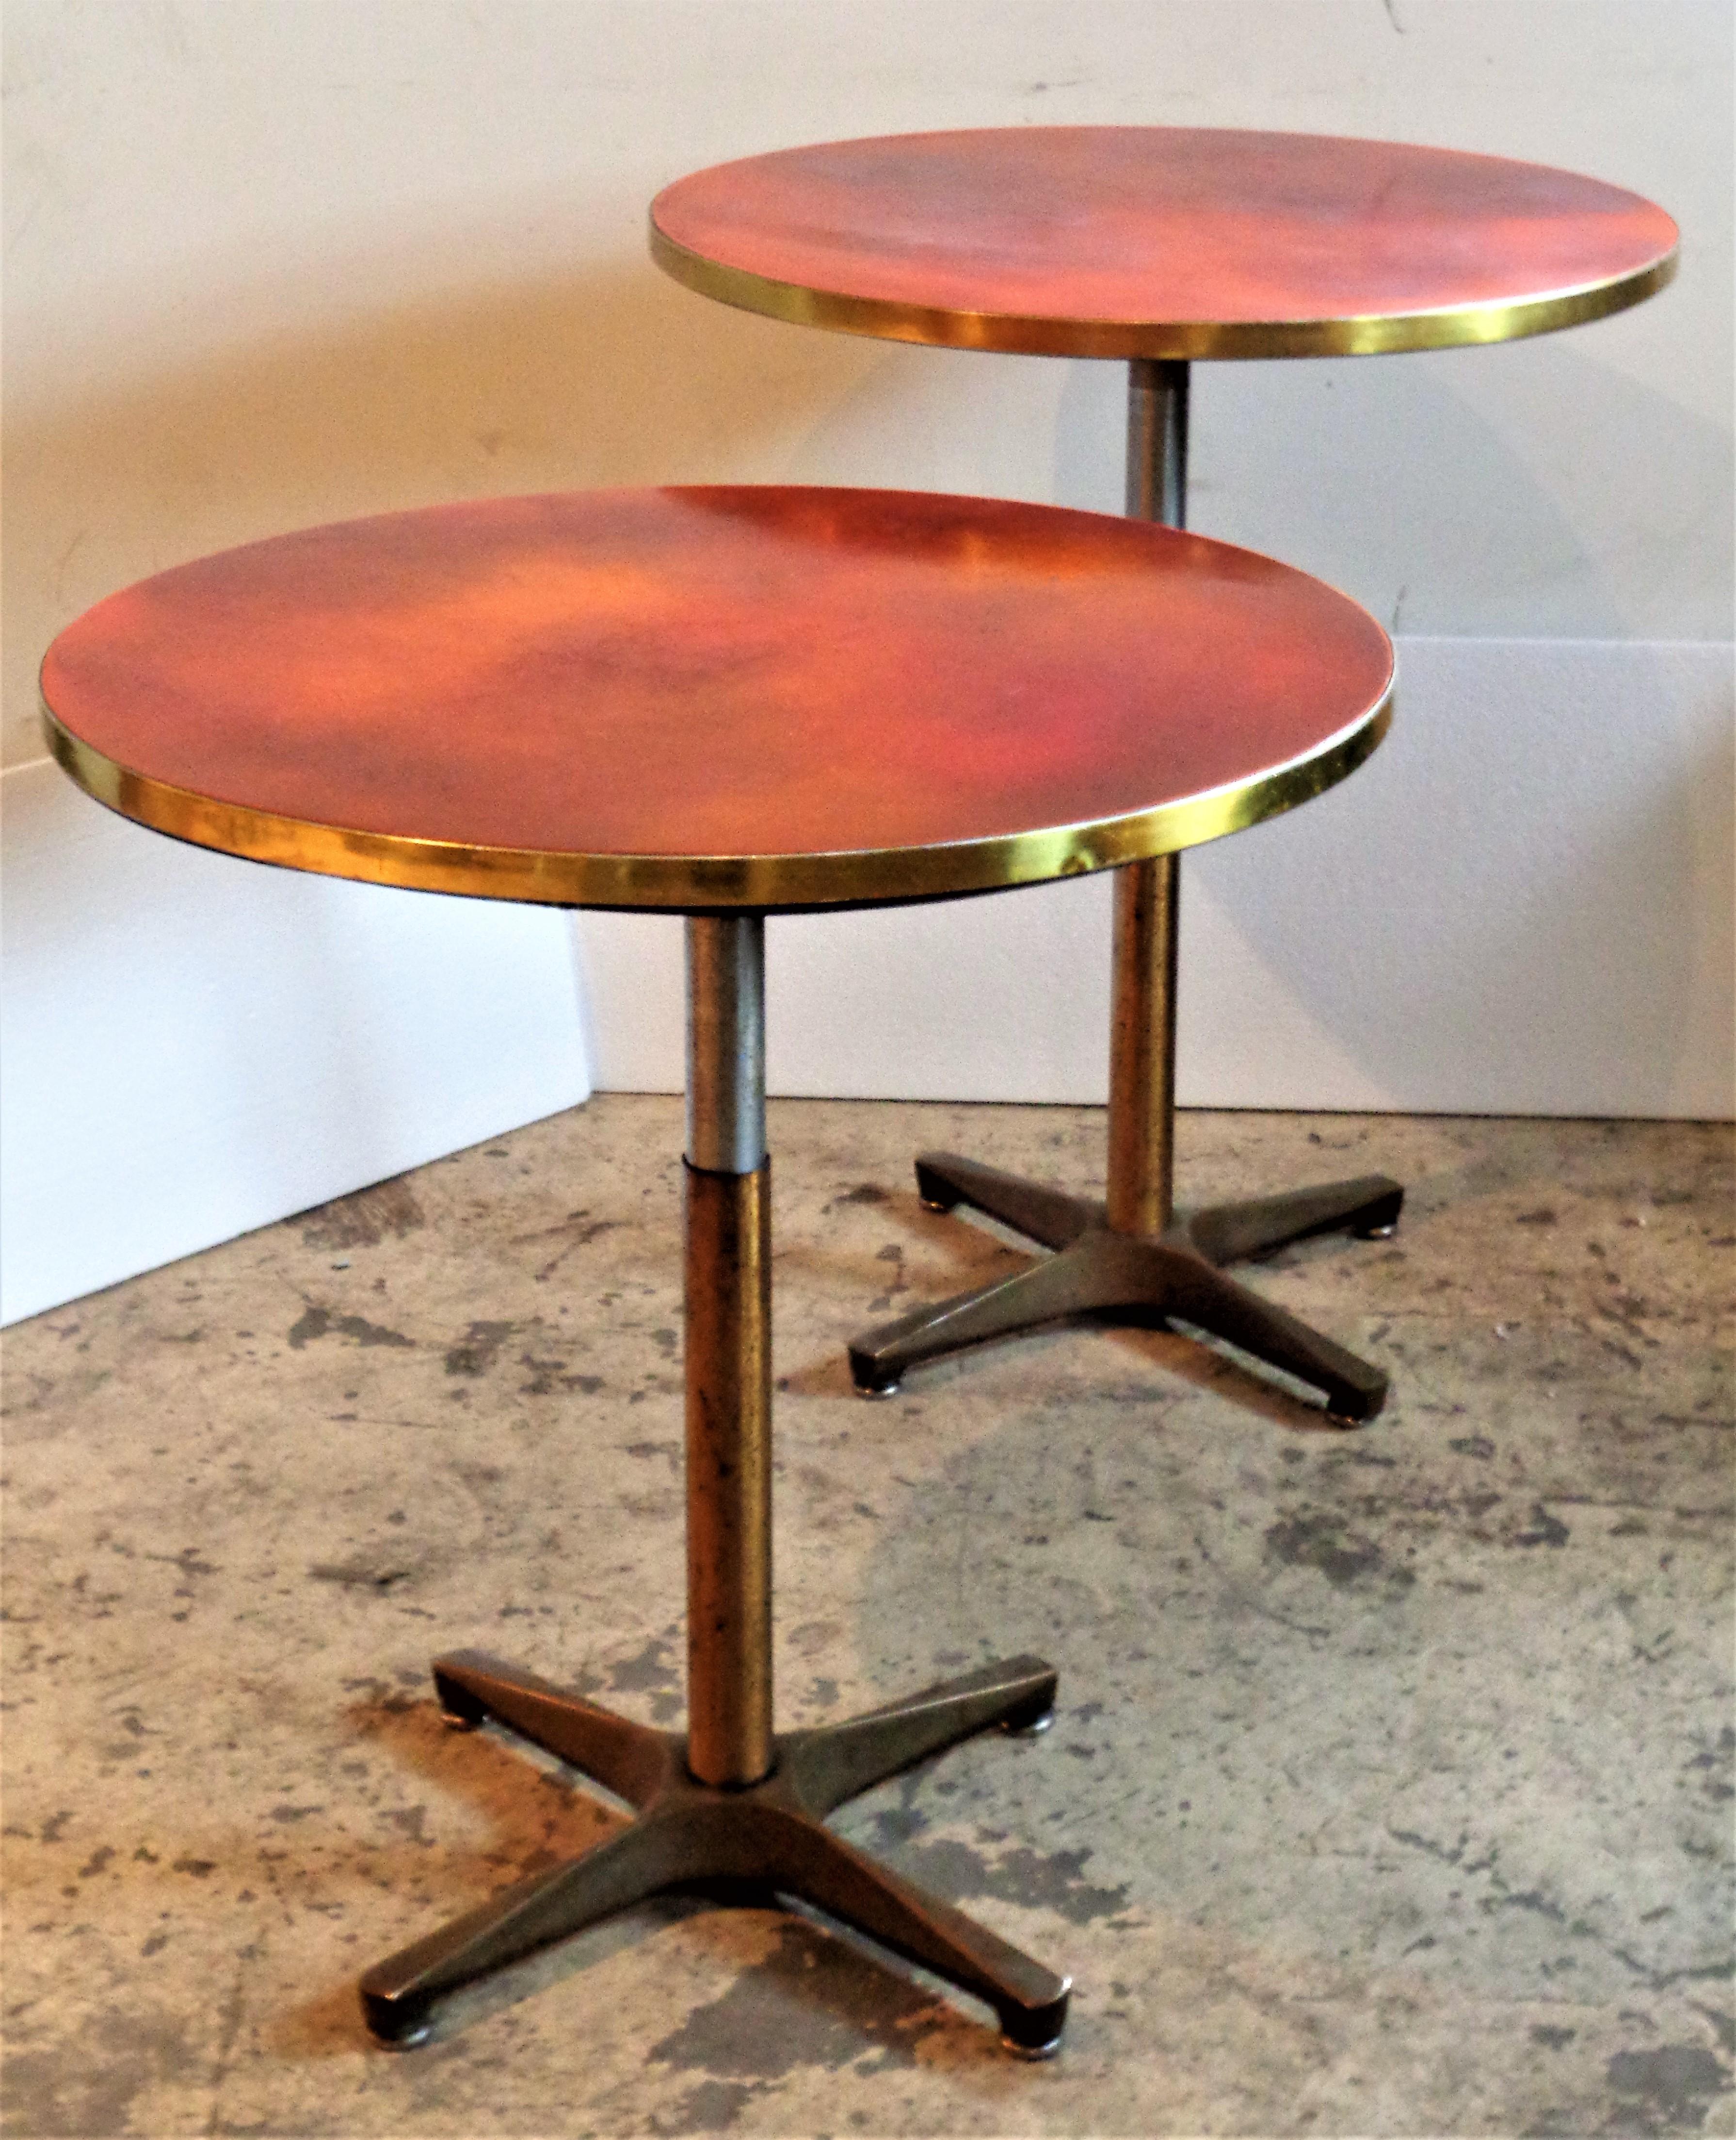 Bronze Base Enamel Top Adjustable Height Tables, 1940-1950 / ONE TABLE IS SOLD  6